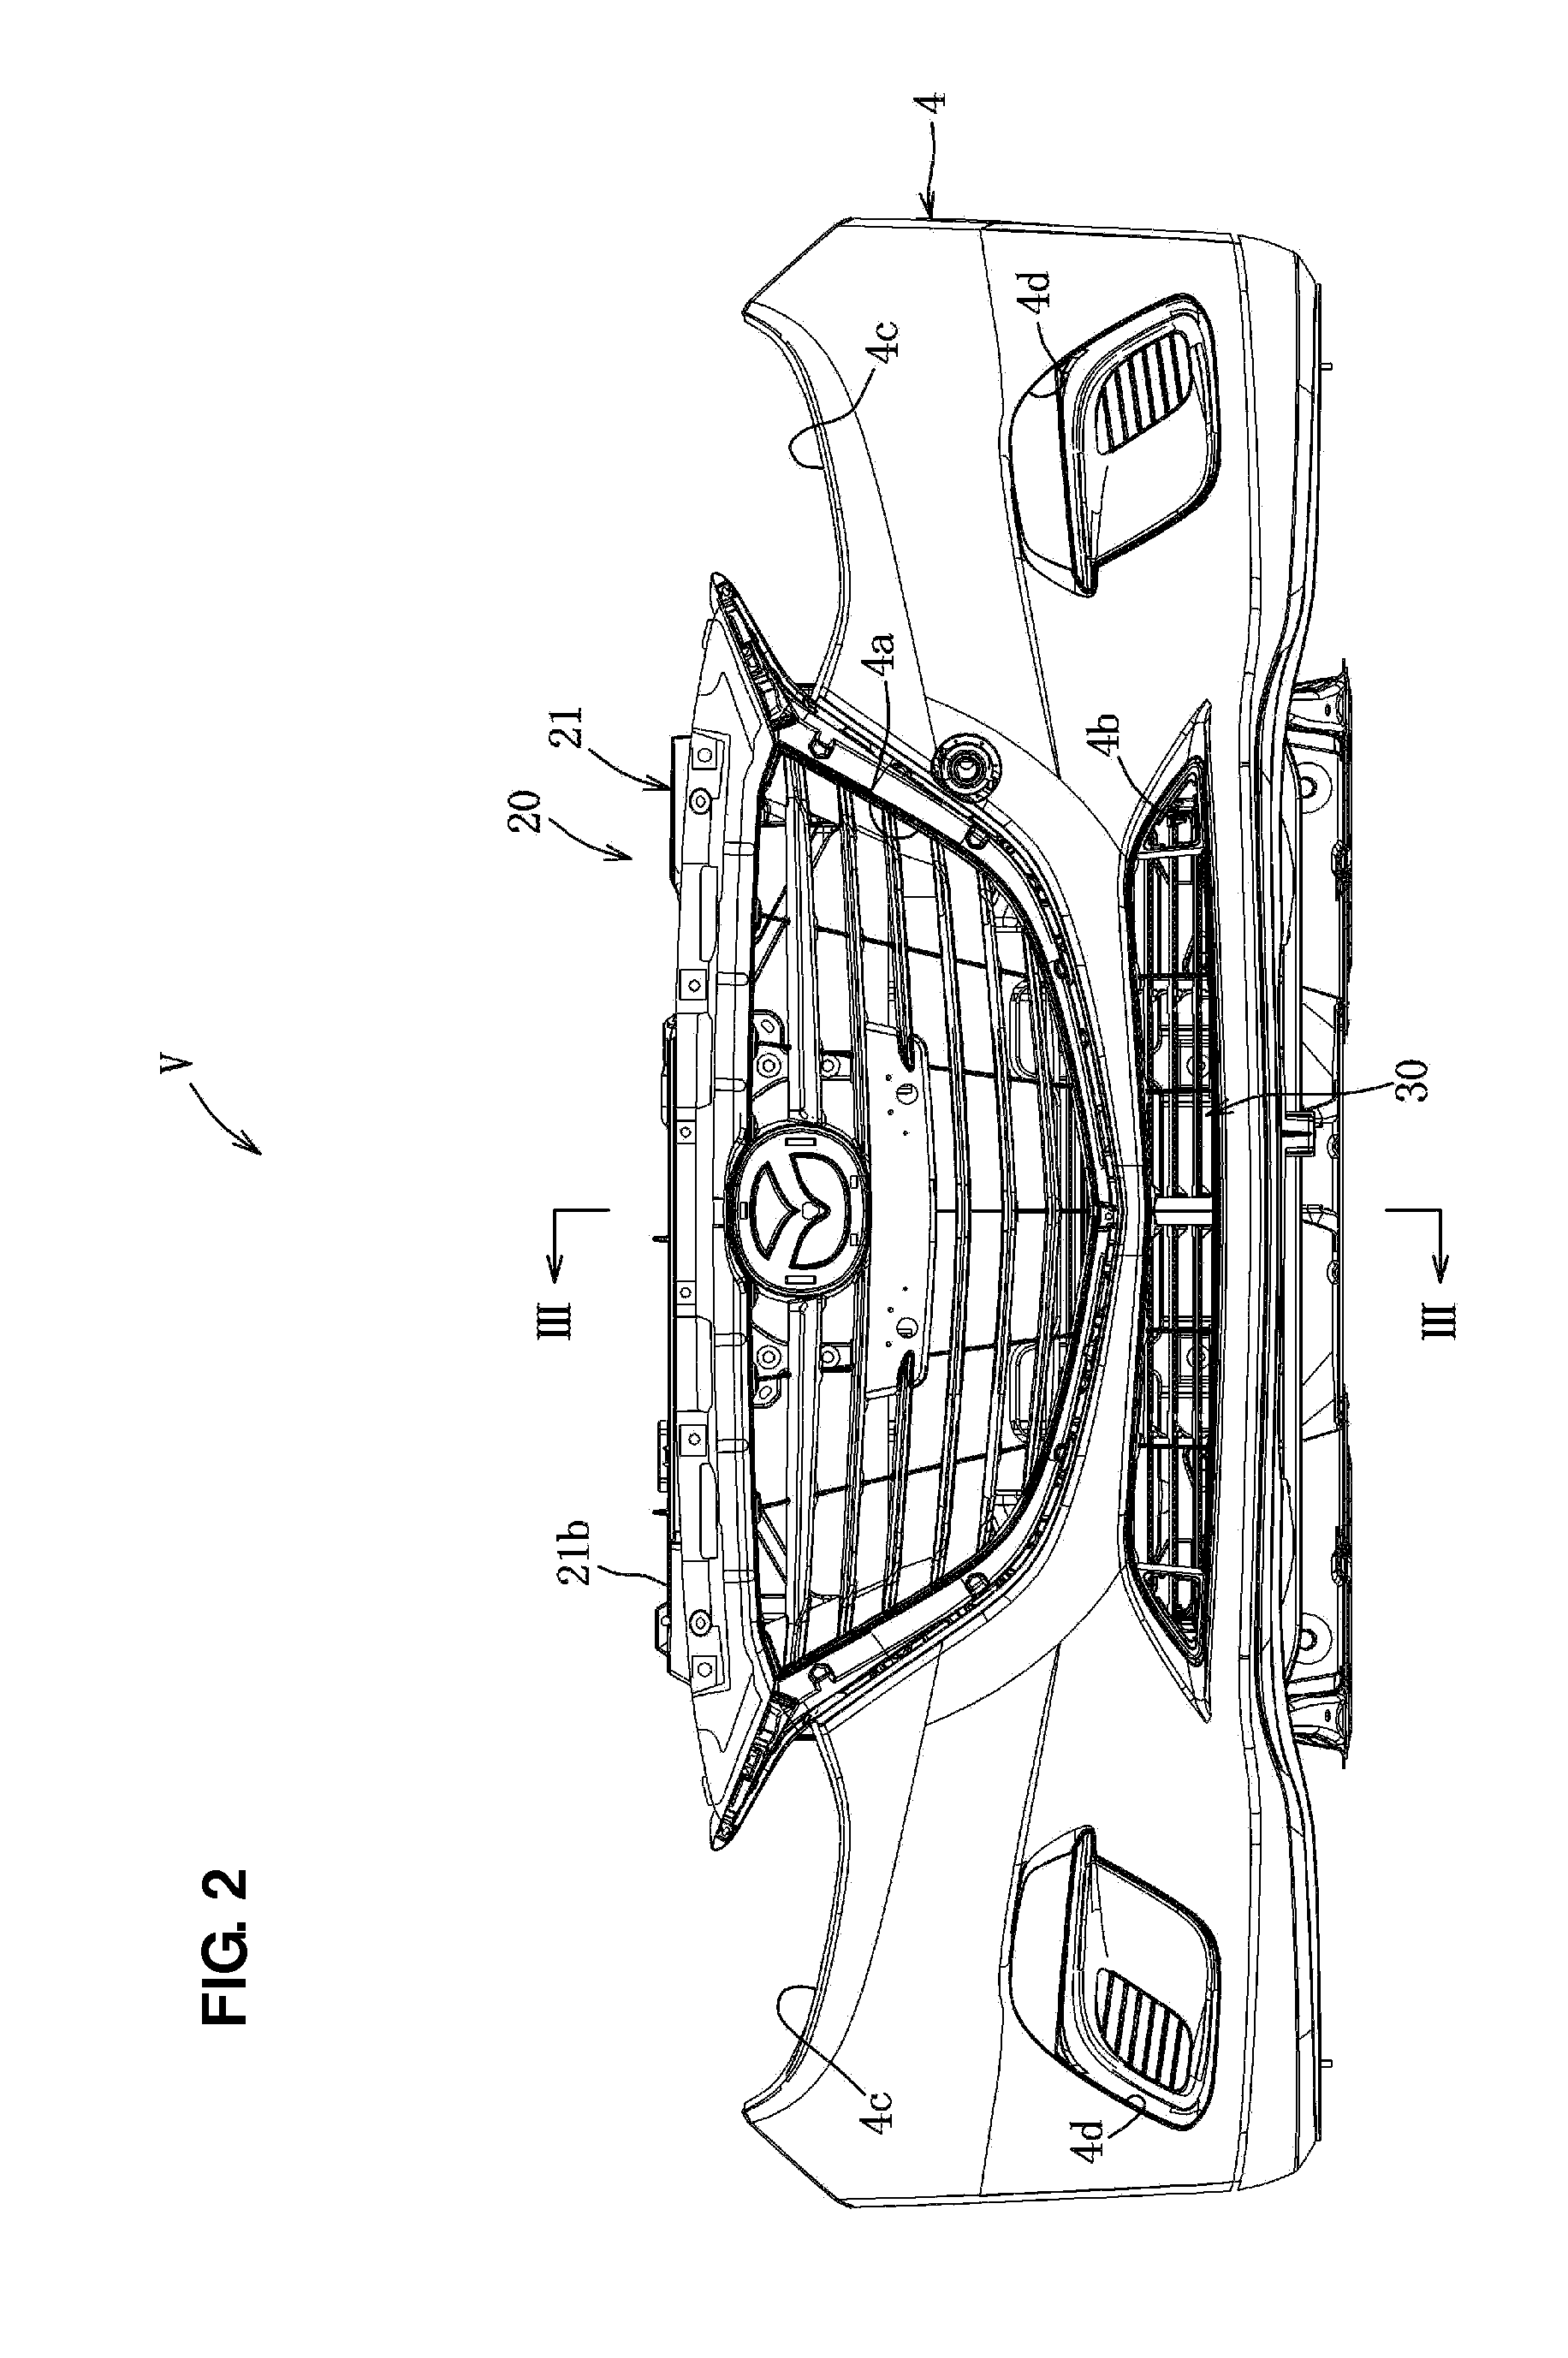 Grill shutter structure of vehicle